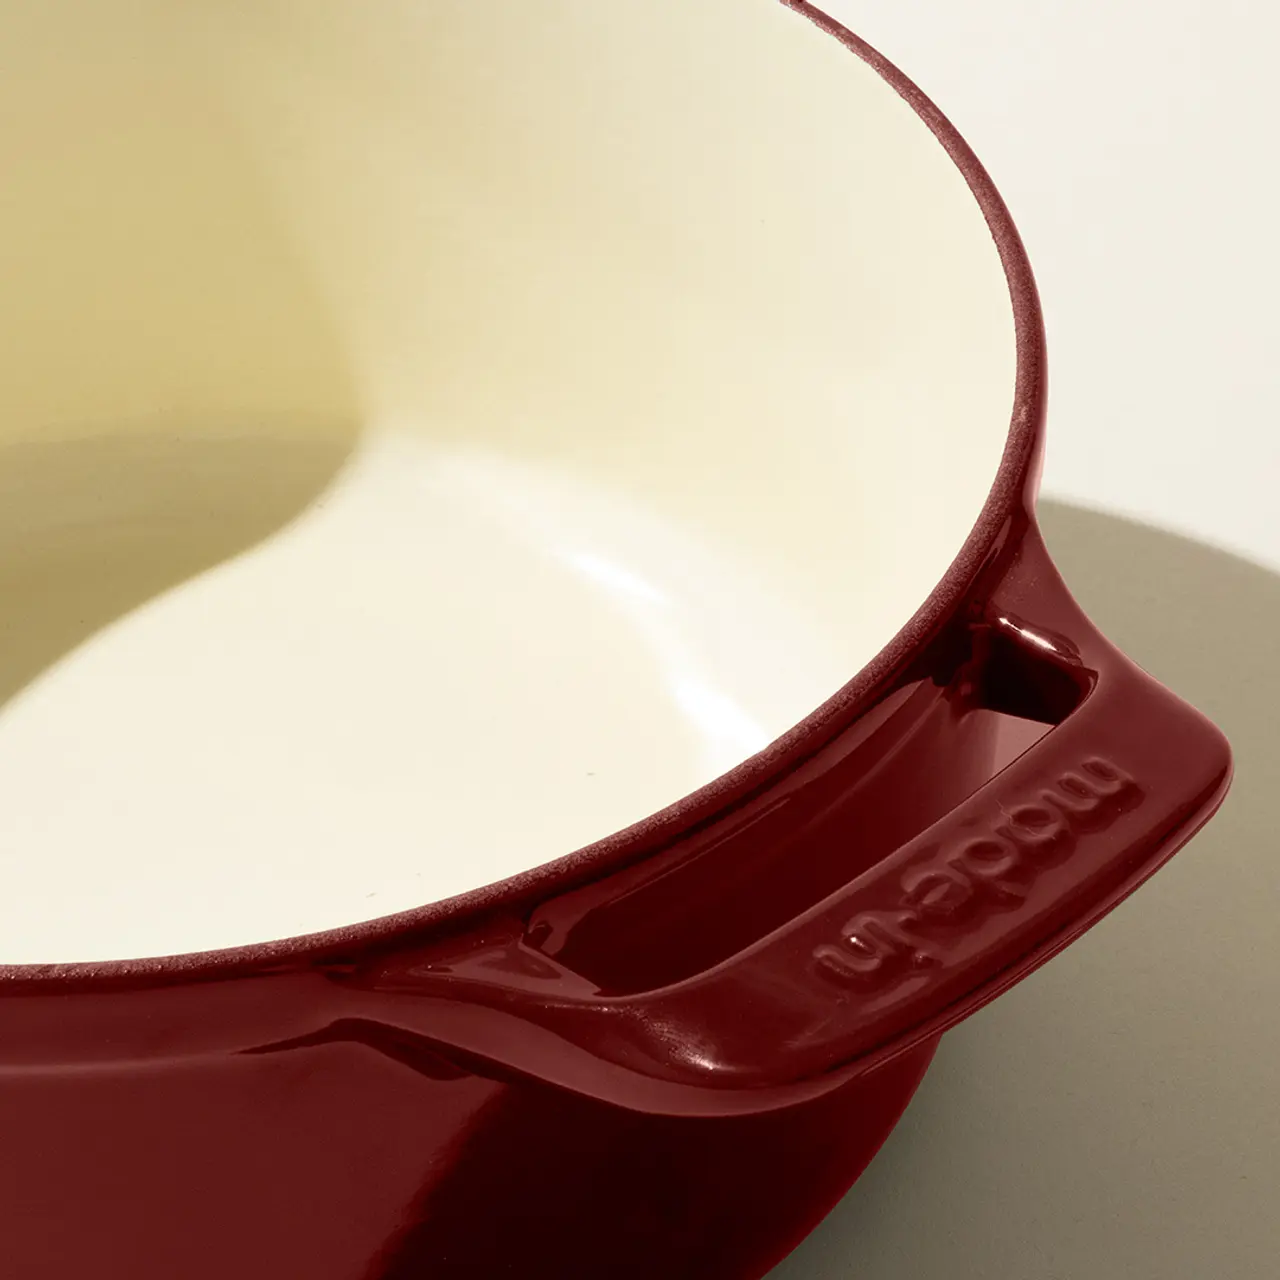 The image shows a close-up of a red enameled cast iron pot with a cream interior, focusing on the pouring spout with the brand name embossed.